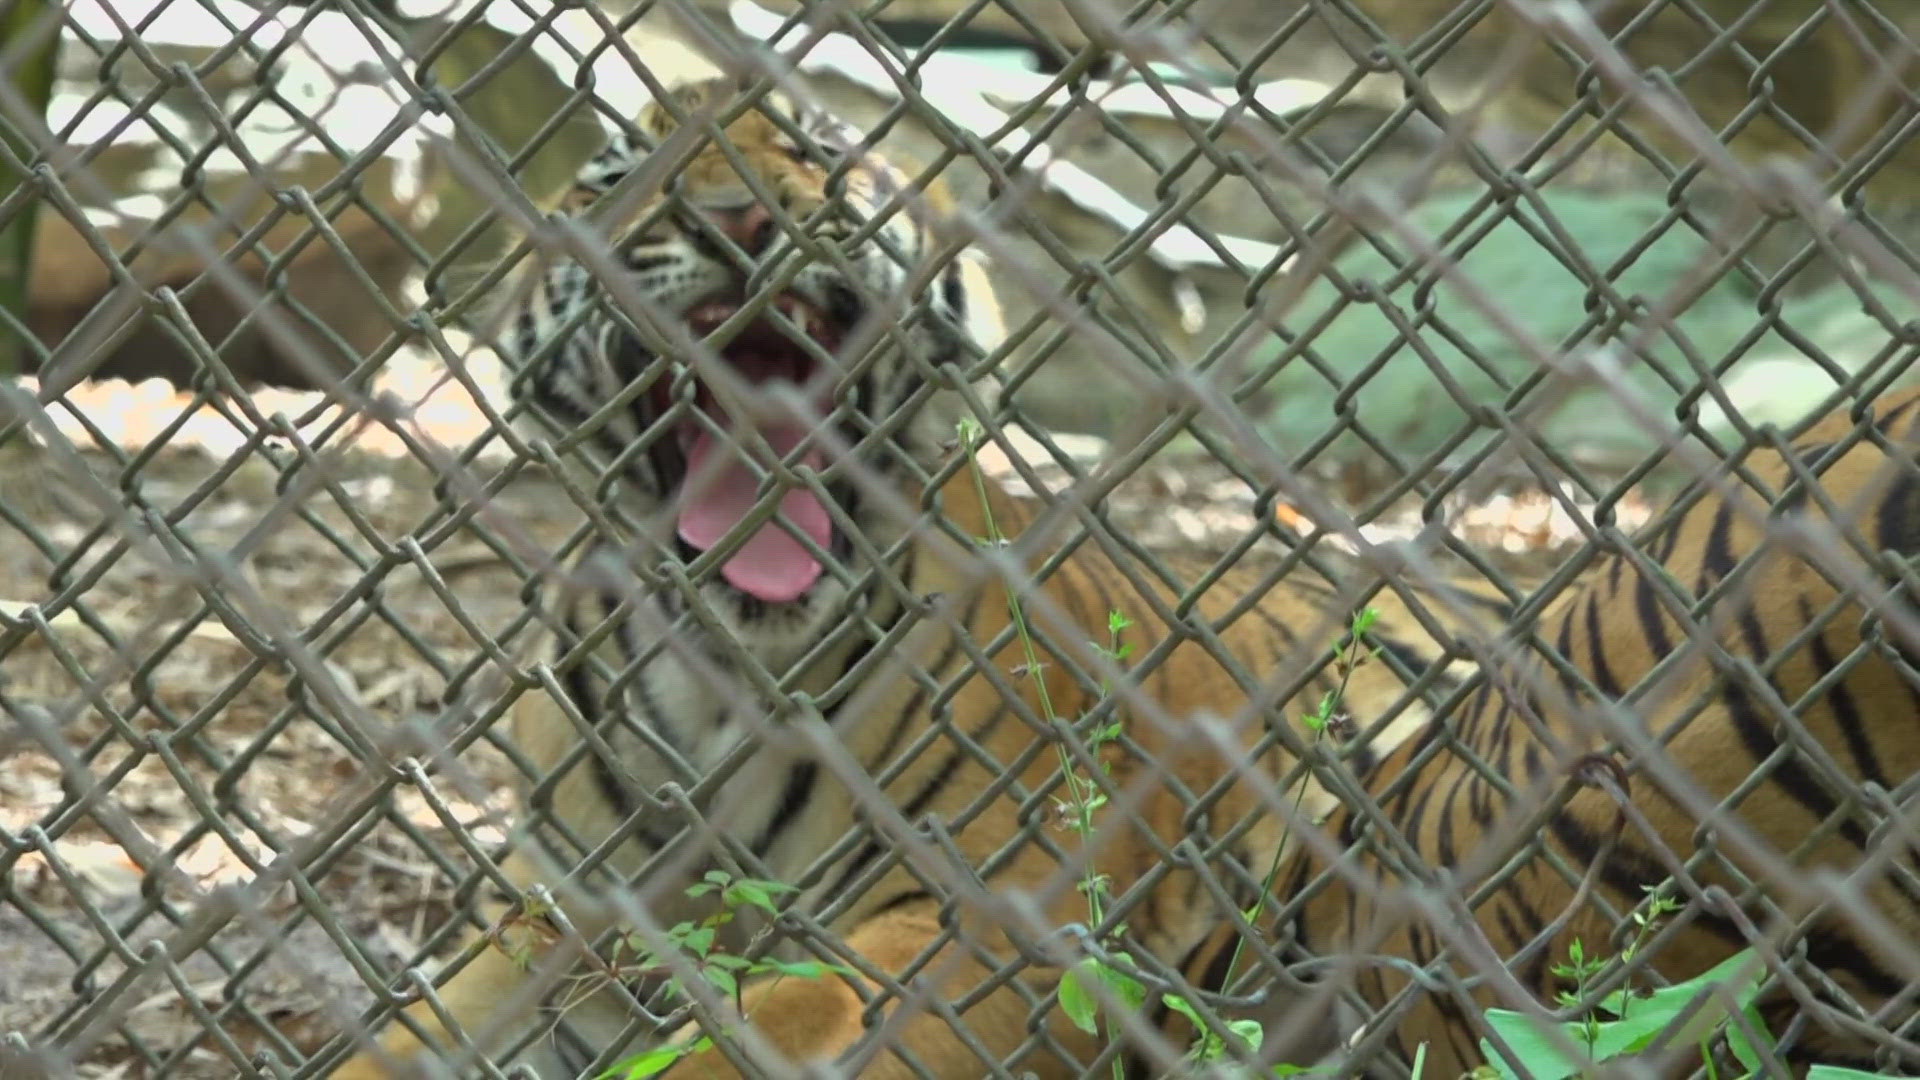 Zoo officials are hoping the cub named Mina can return to the 'Land of the Tiger' exhibit by the end of the summer.